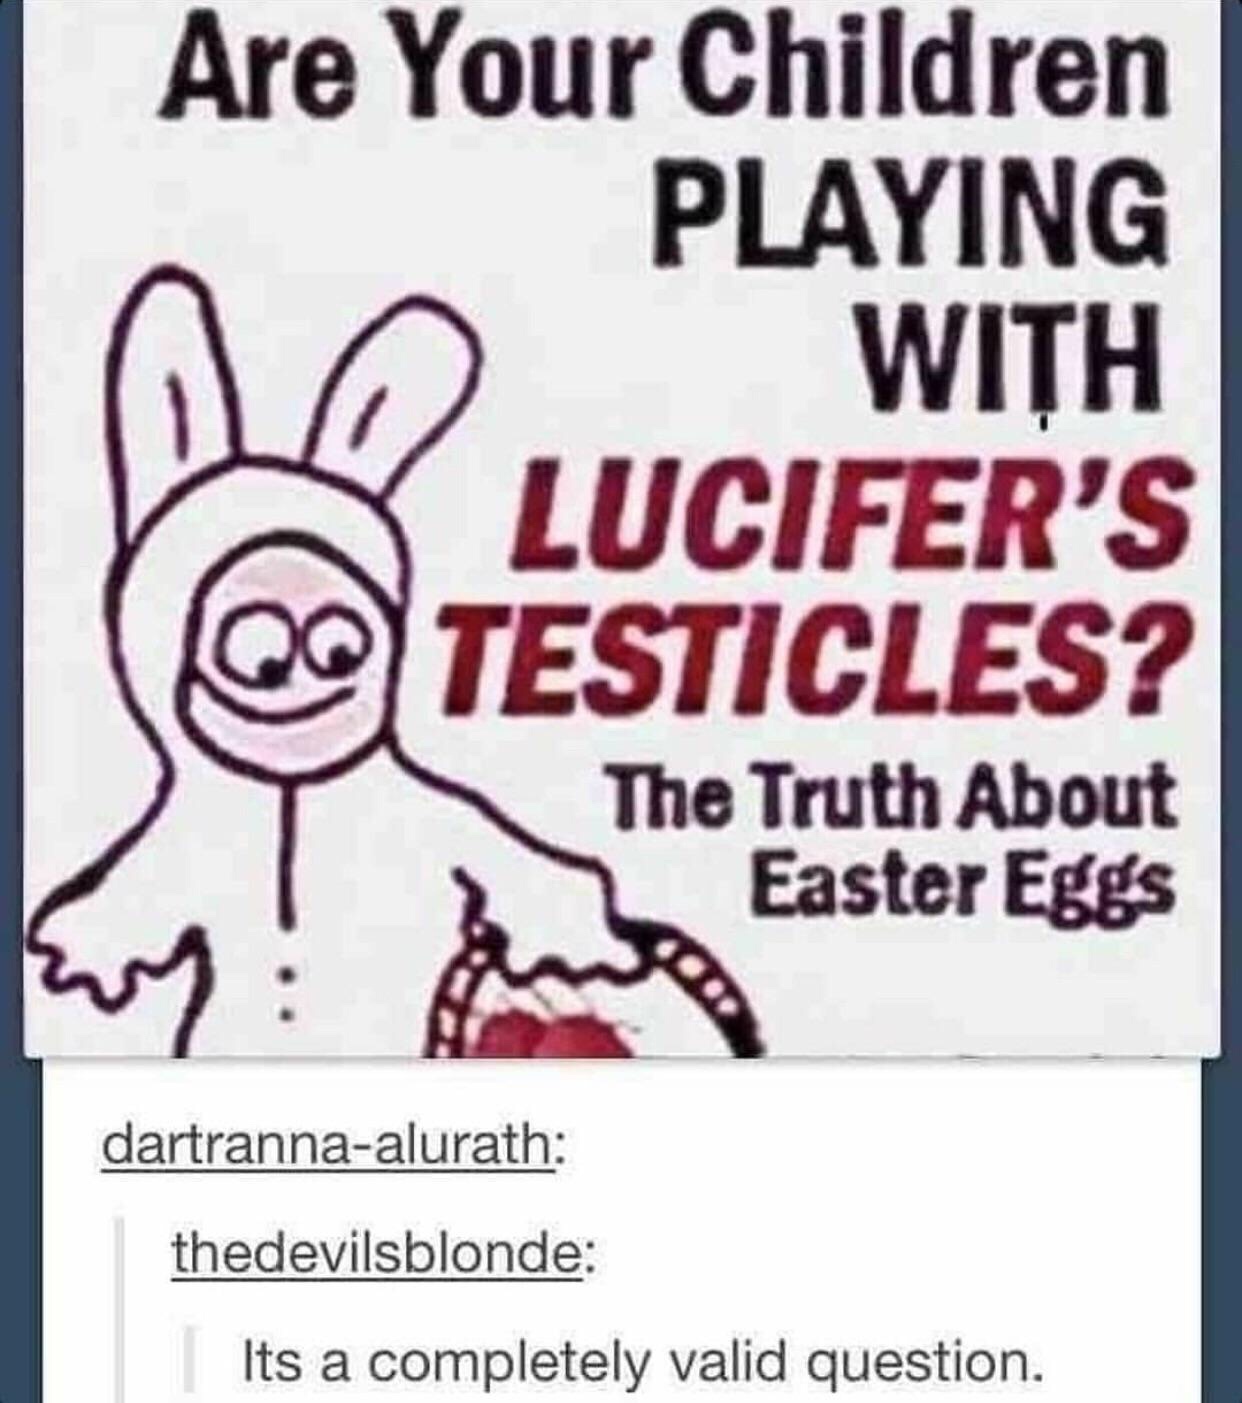 Random pics - human behavior - Are Your Children Playing With Lucifer'S Q Testicles? The Truth About Easter Eggs dartrannaalurath thedevilsblonde Its a completely valid question.